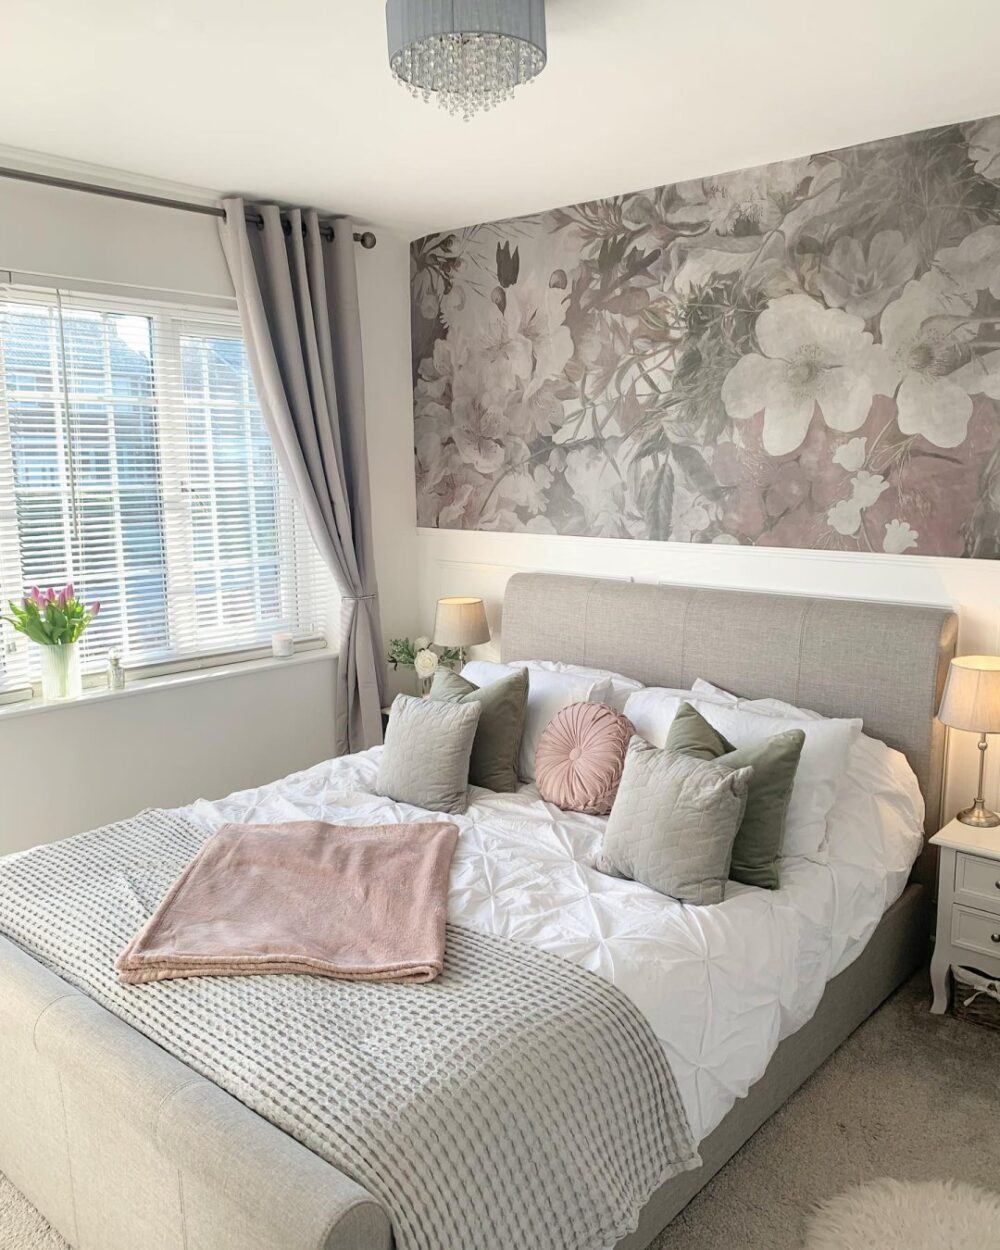 blush pink cushions on white bedding and grey bed with a floral mural of grey, pink and white.